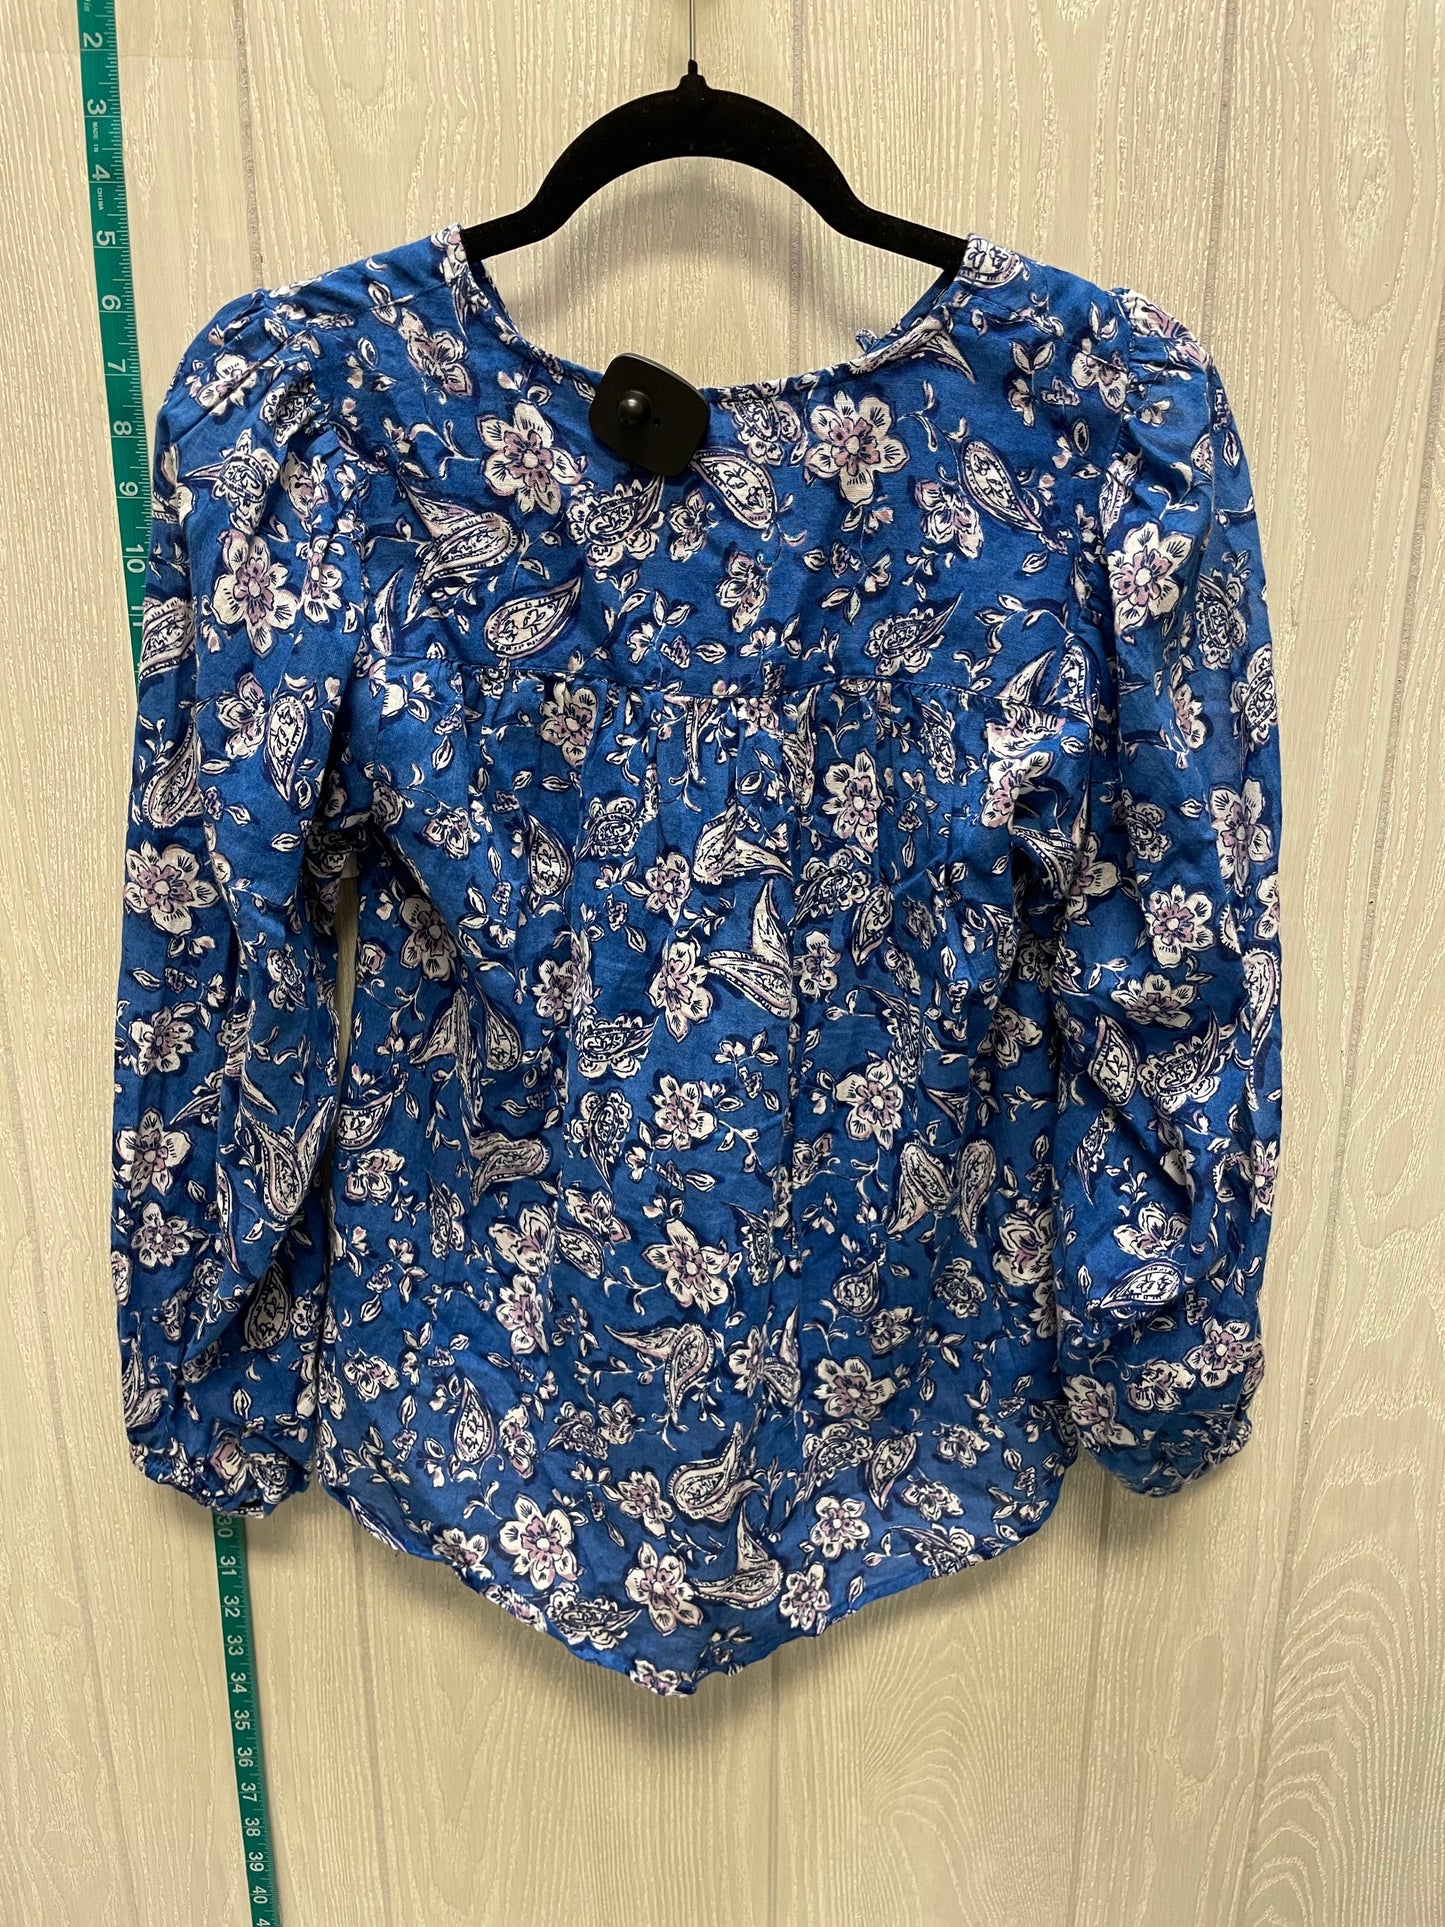 Floral Print Top Long Sleeve Sundry, Size Xs